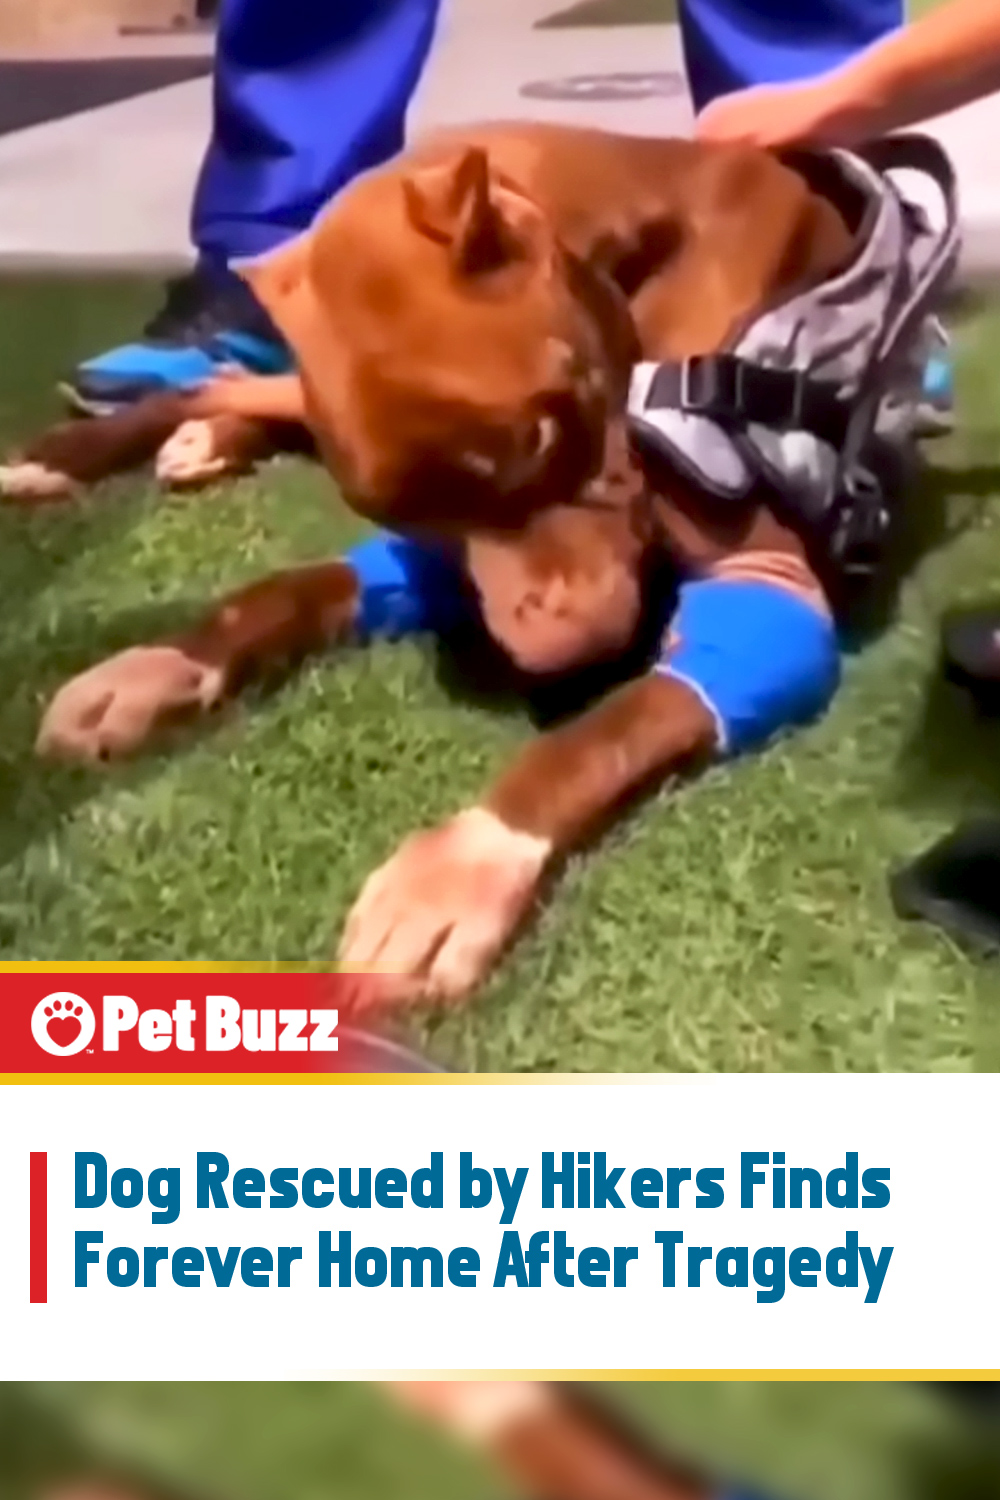 Dog Rescued by Hikers Finds Forever Home After Tragedy